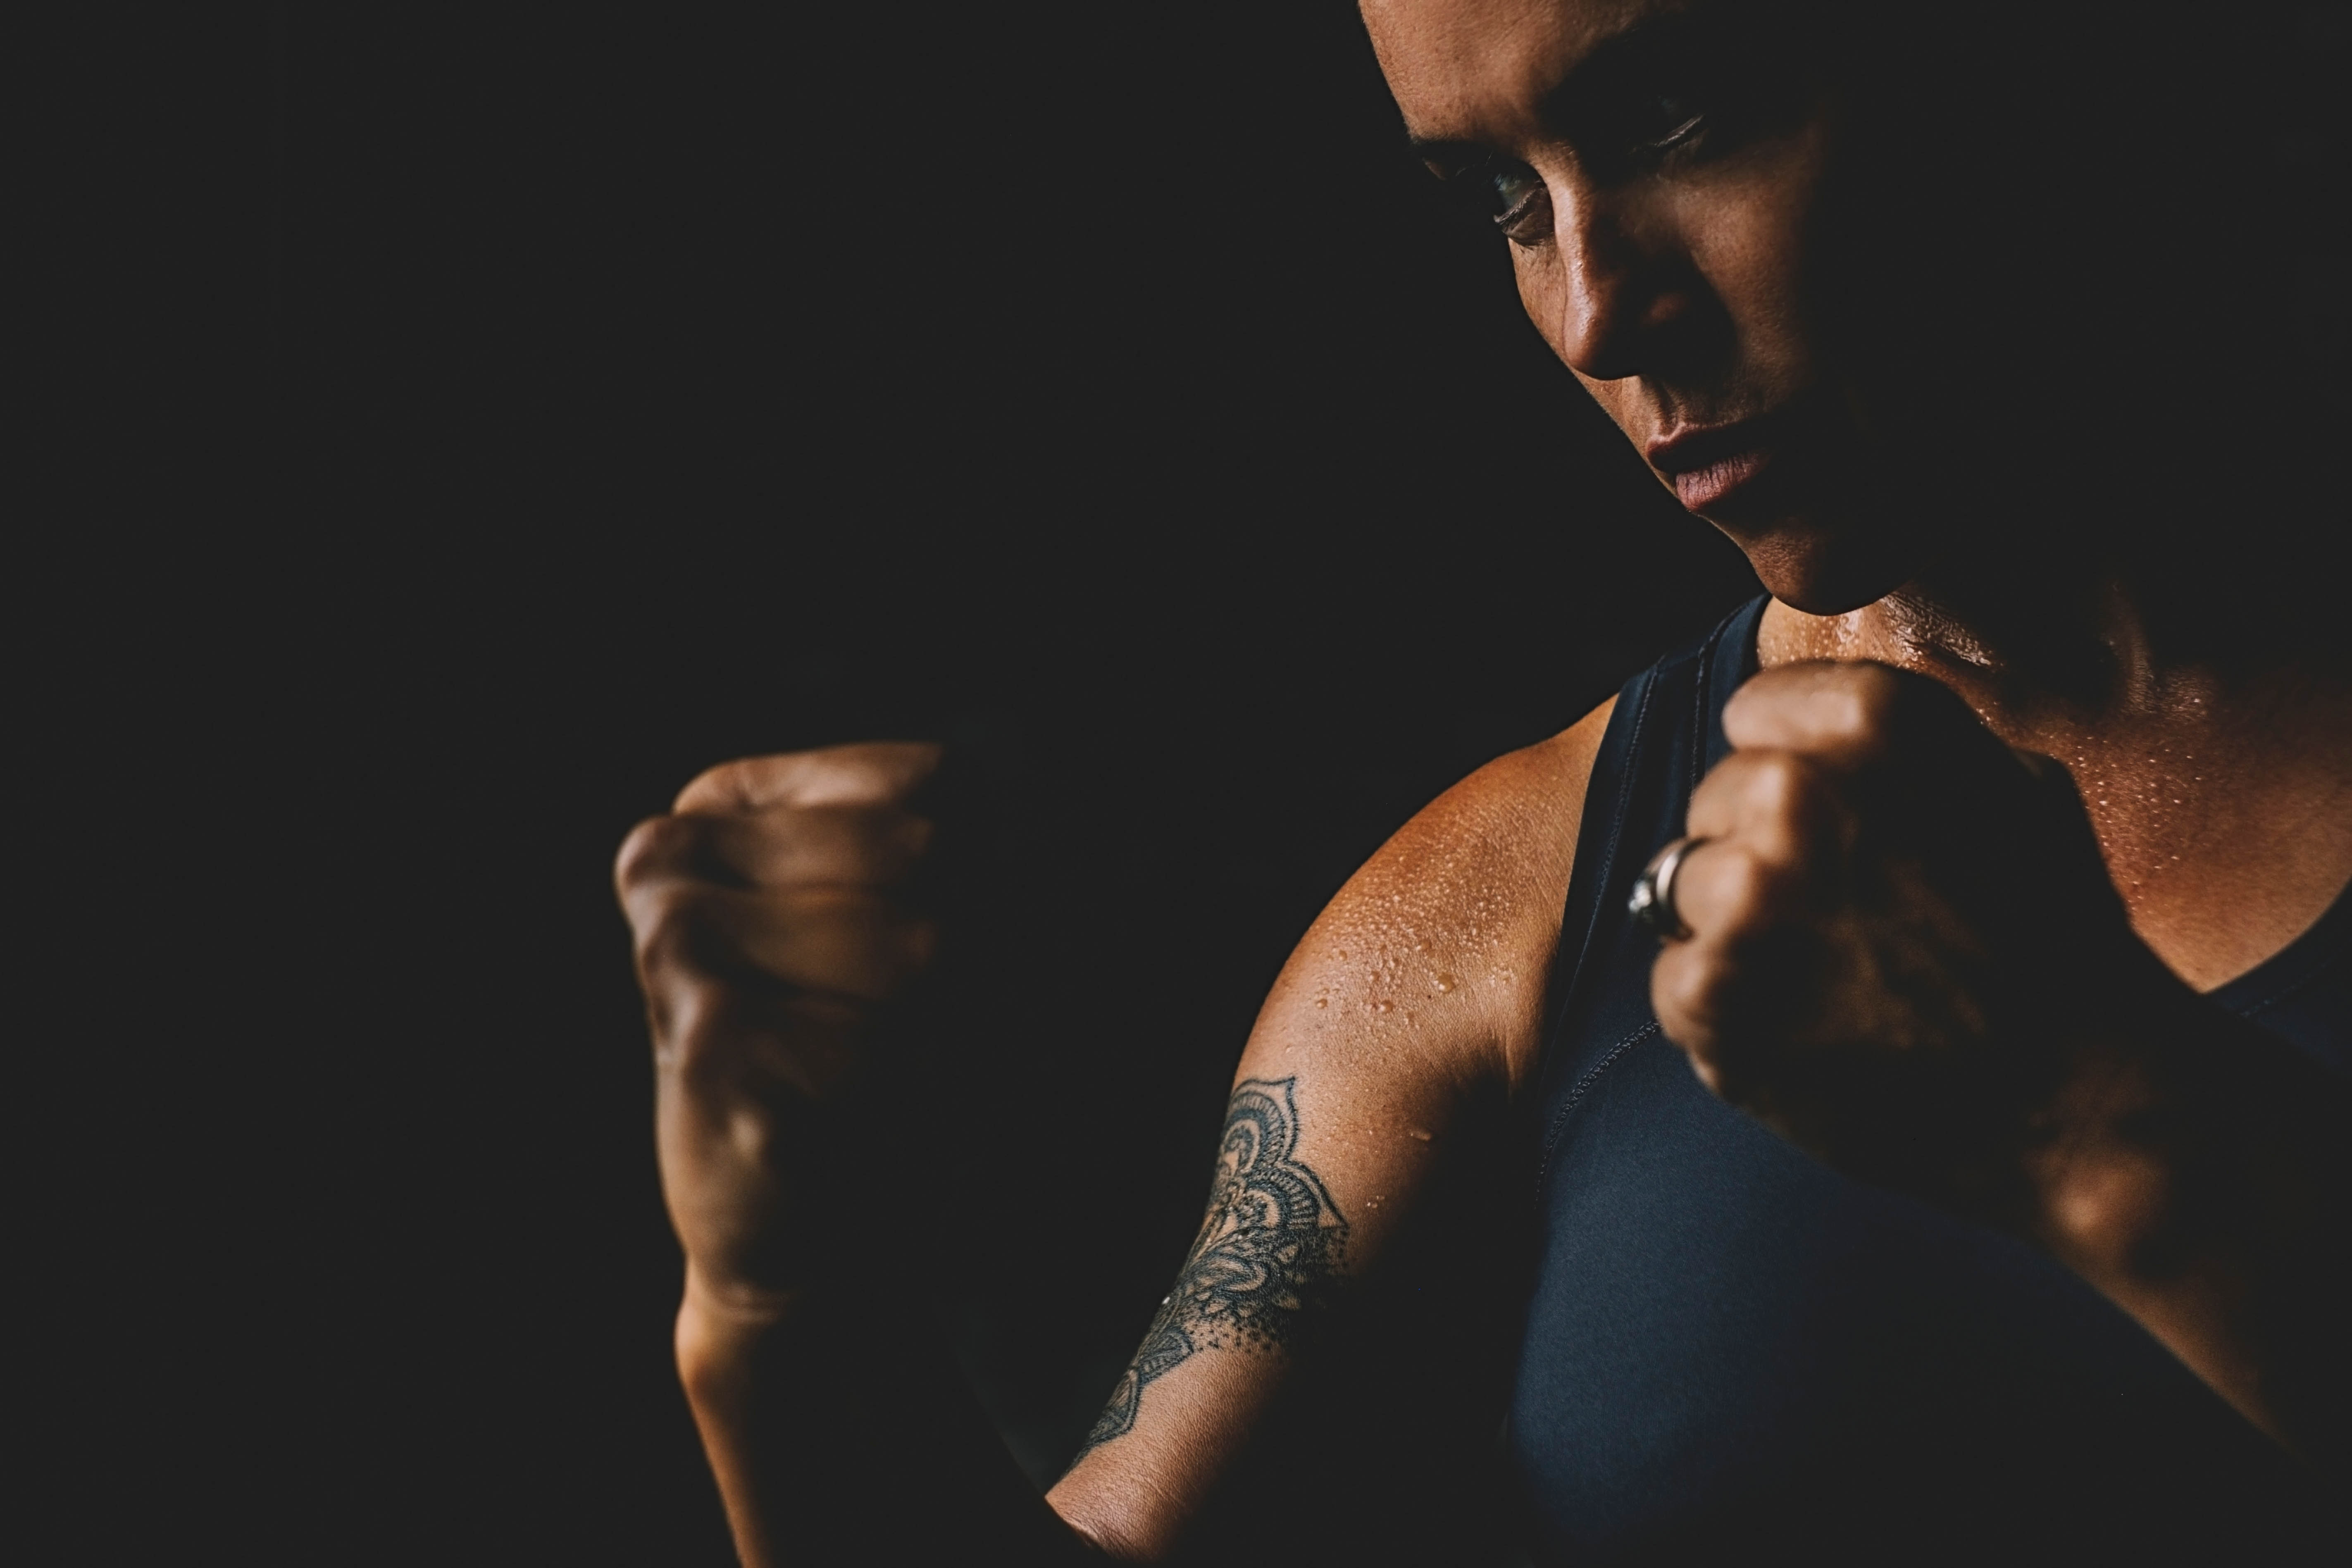 Strong woman boxer with a tattoo, with her fists up in a dark room